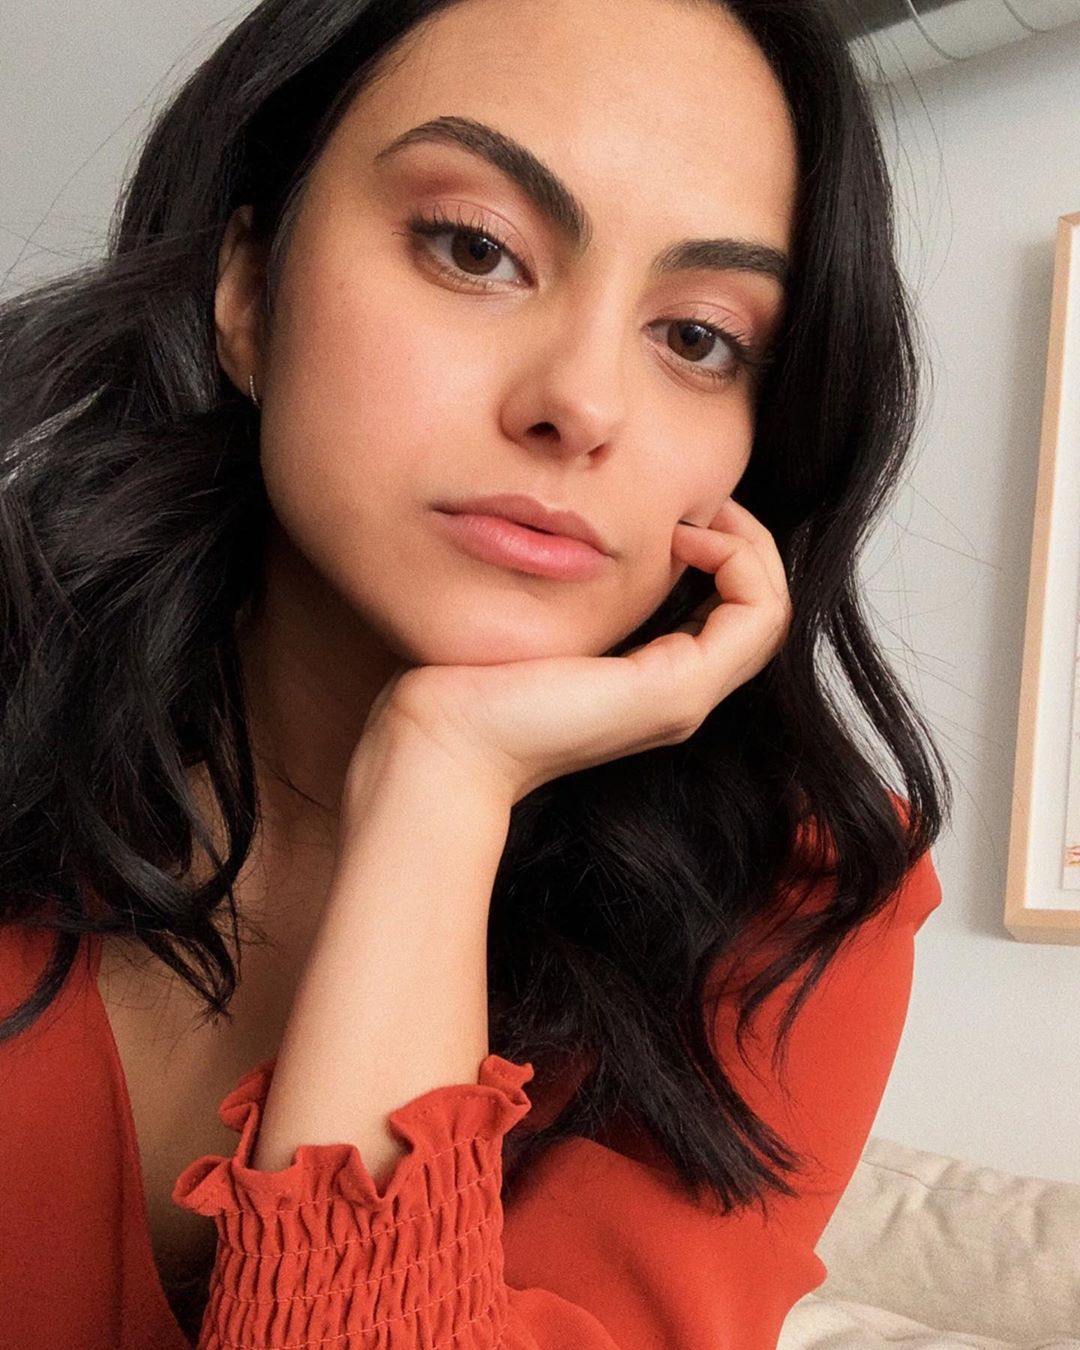 Camila Mendes Wiki, Bio, Family, Success Story, Career, and Boyfriend